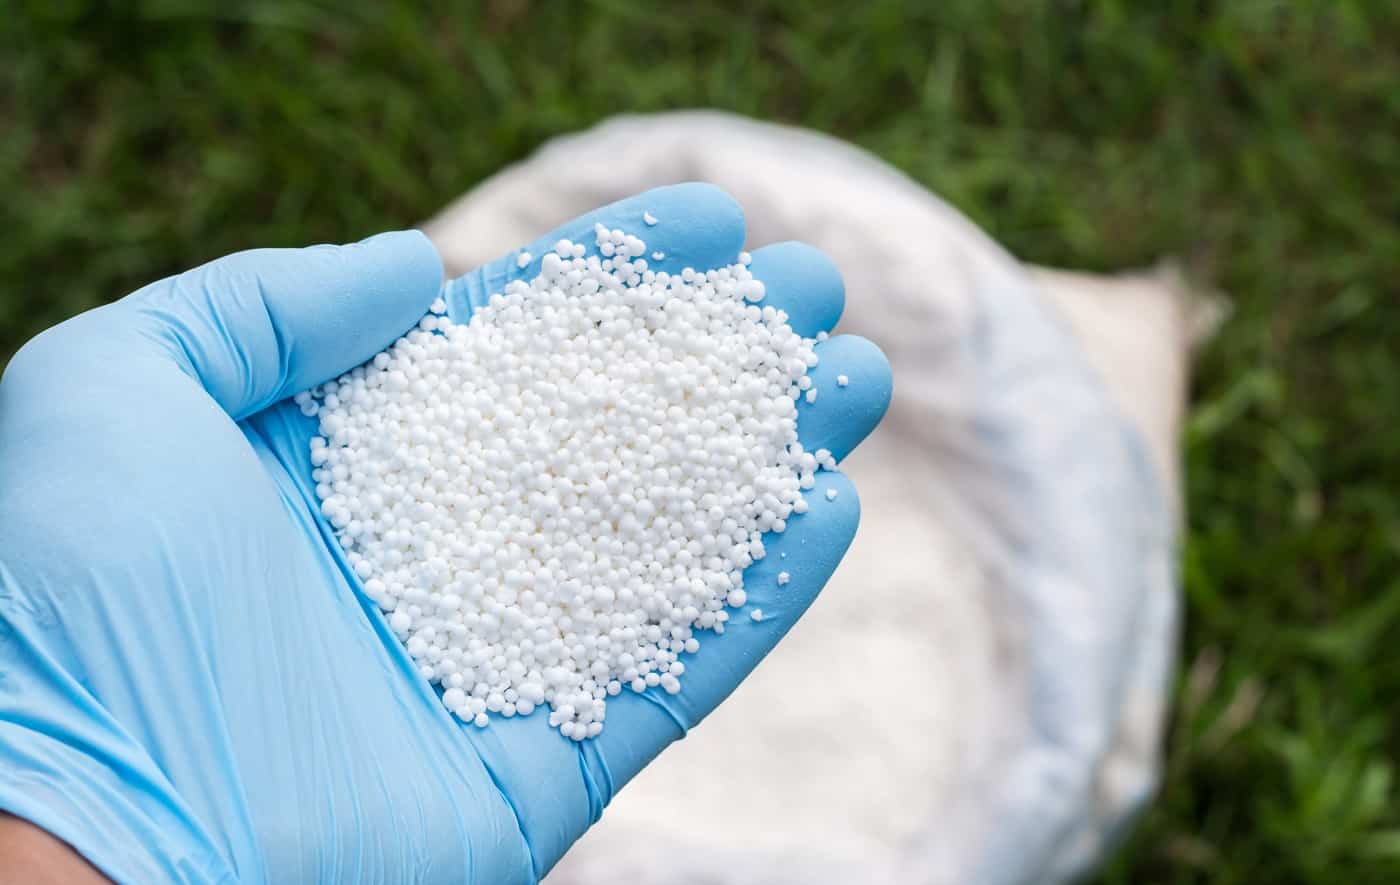 Farmer`s hand in blue glove holds white granular fertilizer against a green lawn and a bag on it